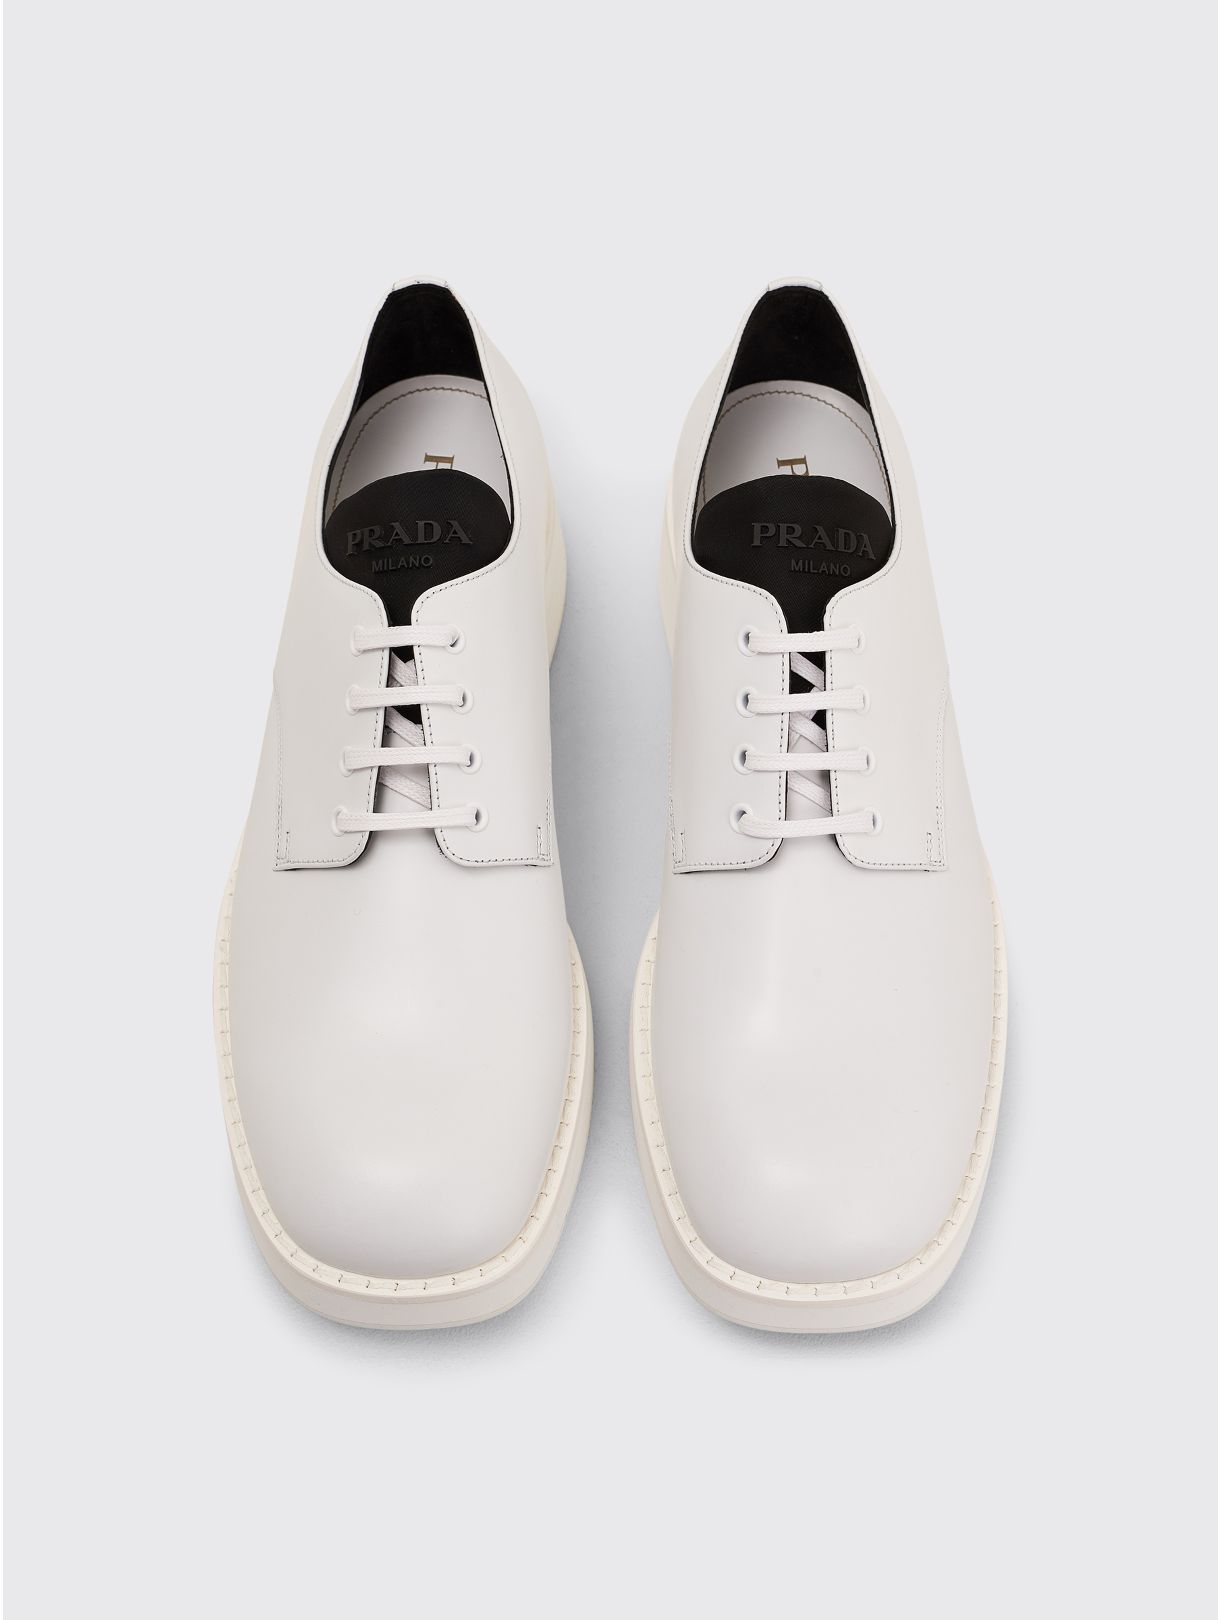 Très Bien - Prada Leather Lace Up Brushed Derby Shoes White